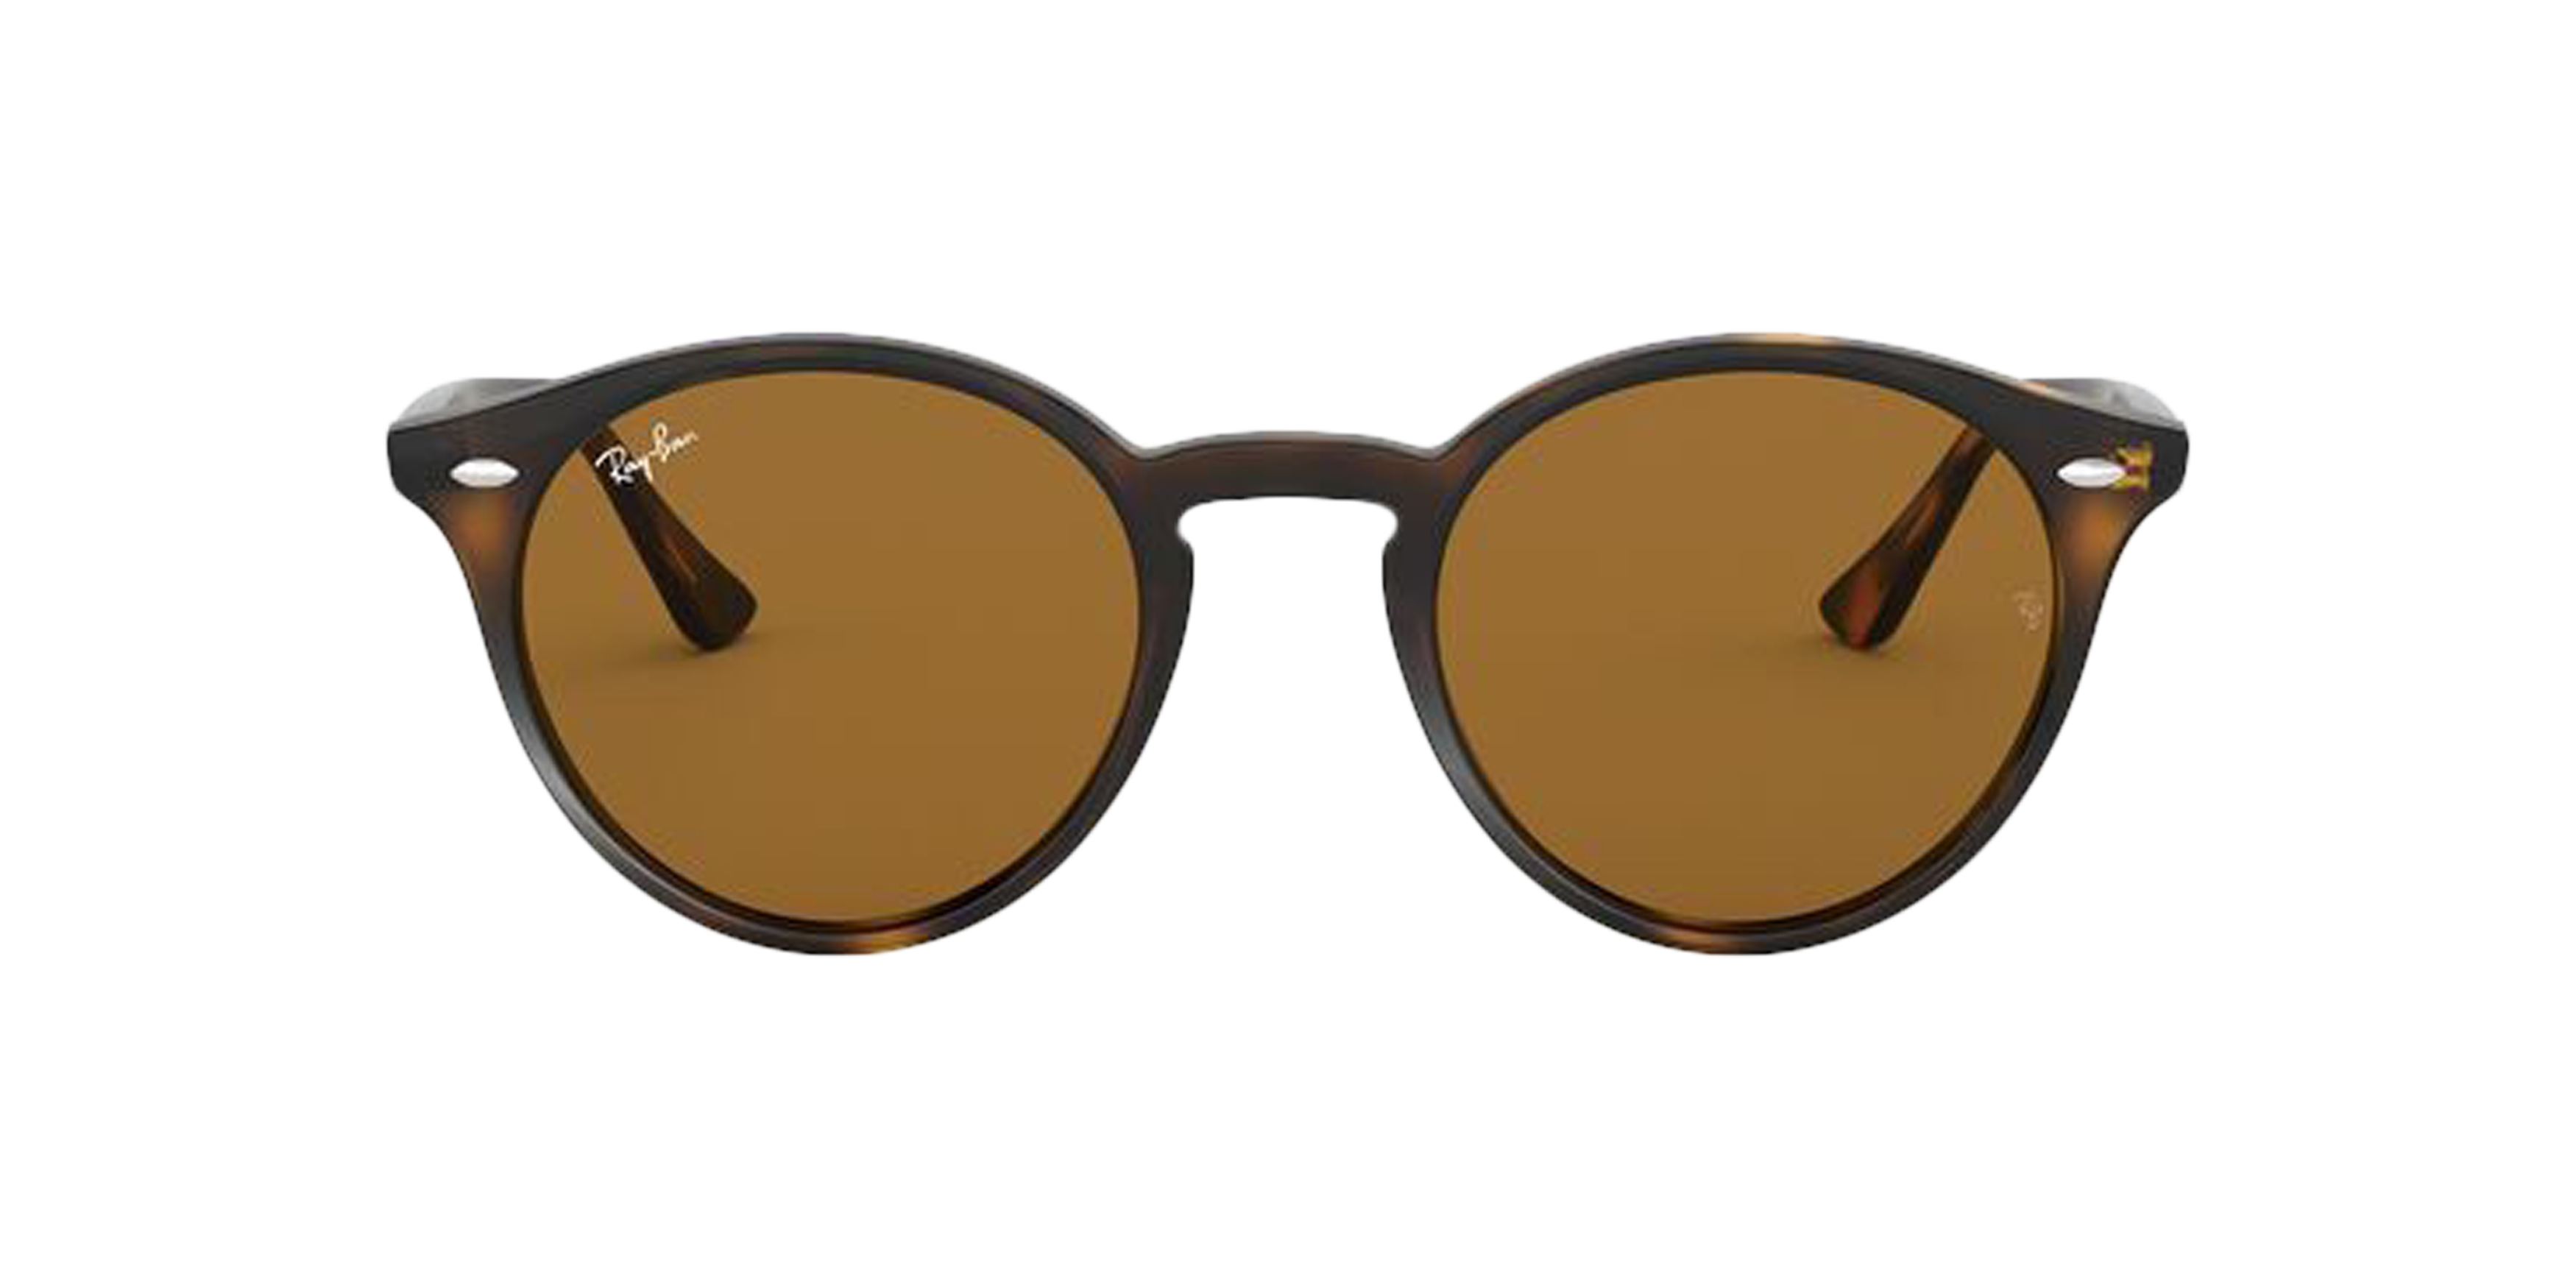 [products.image.front] RAY-BAN RB2180 710/73